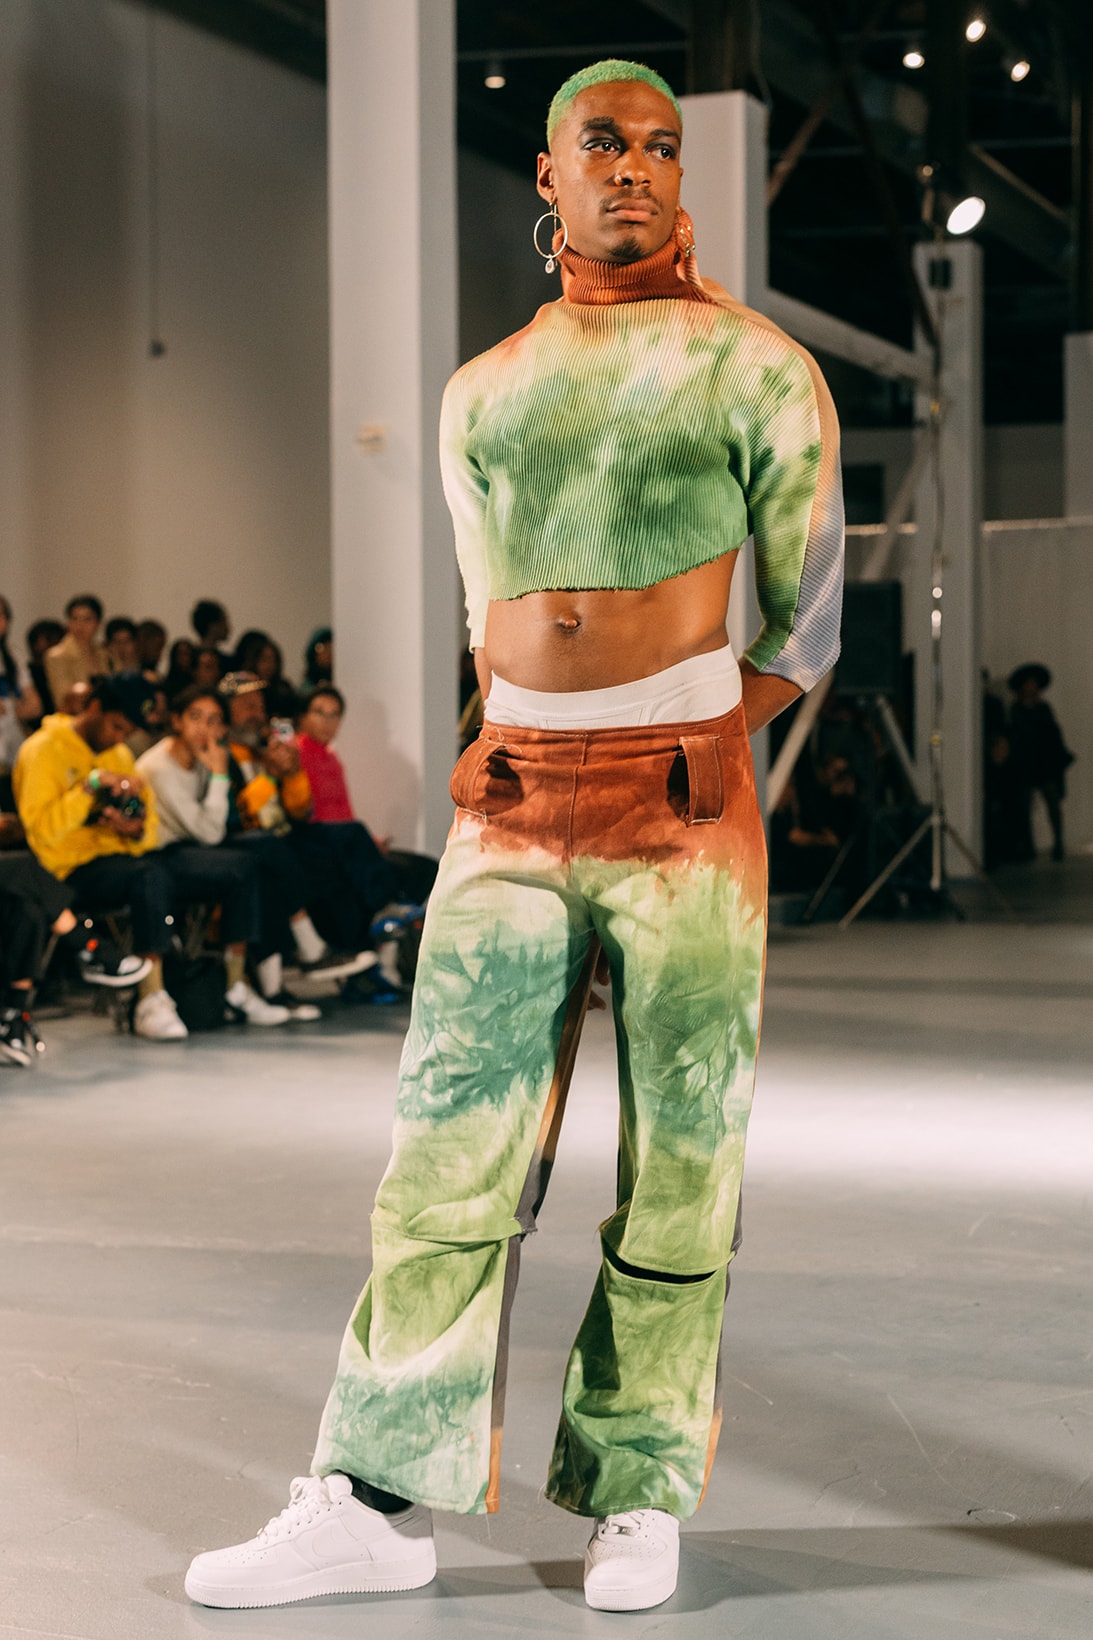 no sesso pierre davis arin hayes autumn randolph fall winter collection los angeles runway show pants sweat white sneakers